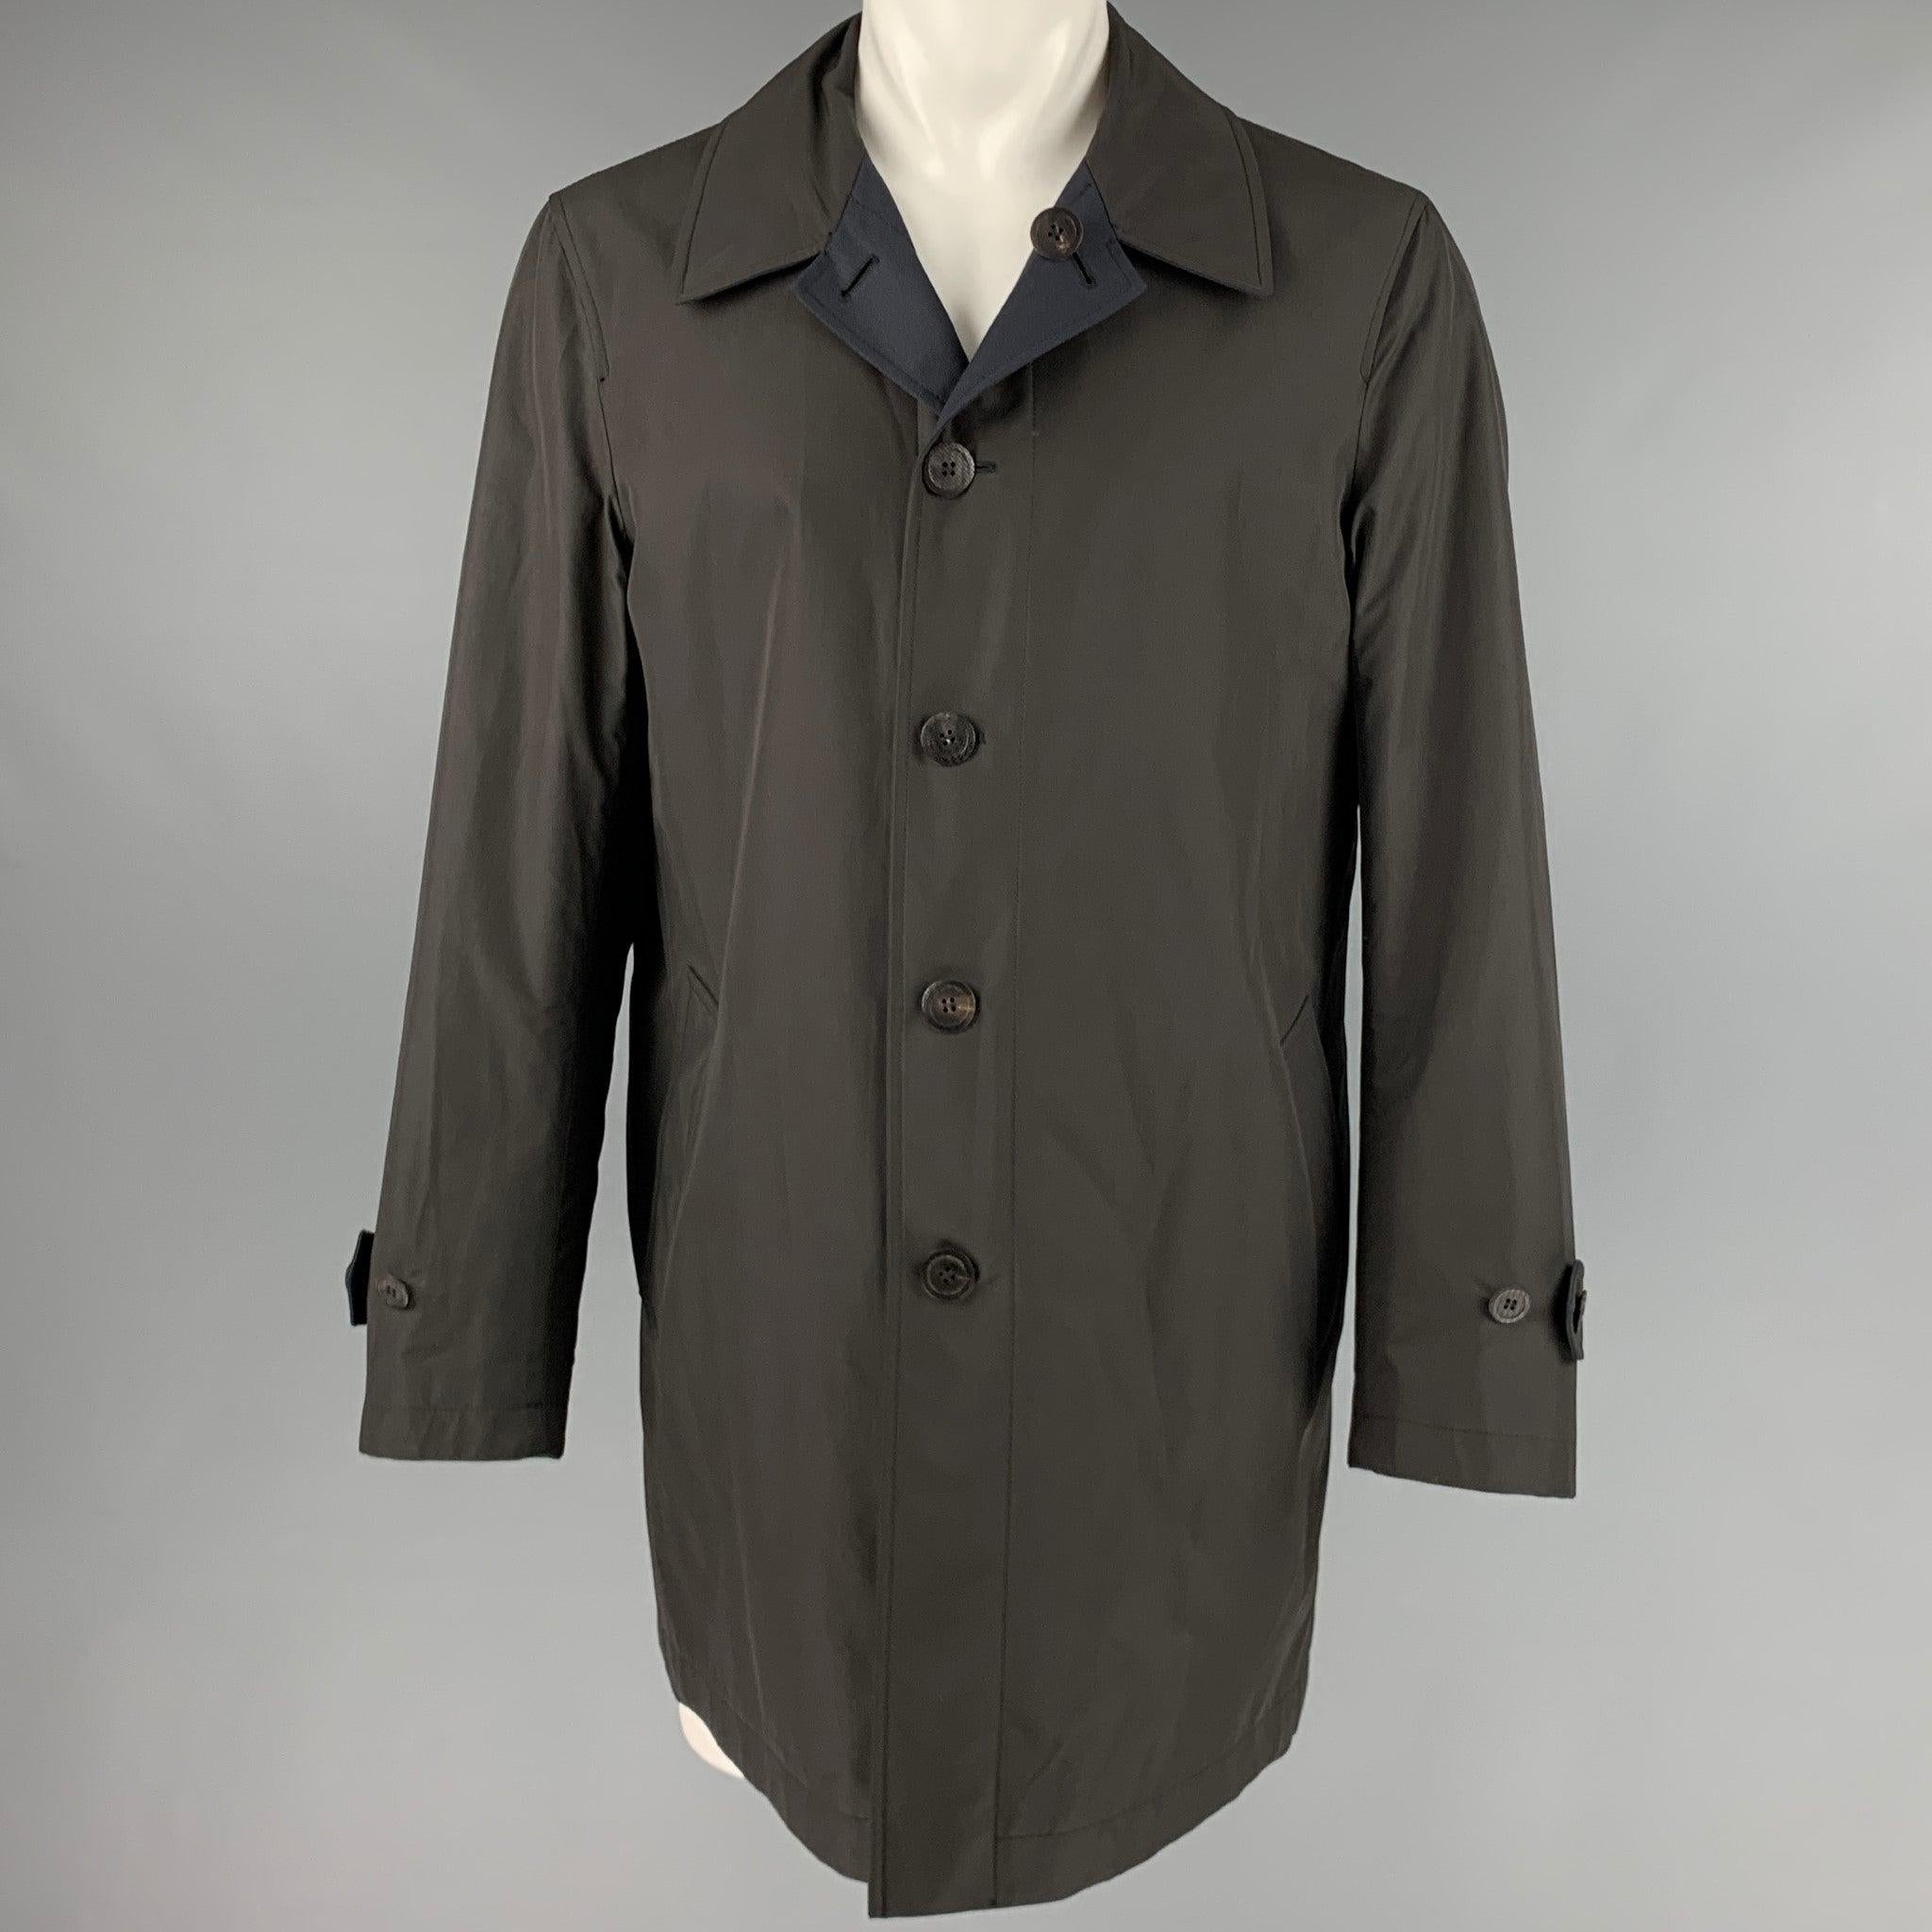 CANALI coat
in a
navy and brown polyester fabric featuring a two tone style, wind and light rain protection technology, and button closure, with hidden buttons on the navy side. Made in Italy.Very Good Pre-Owned Condition.
Minor marks on brown side.